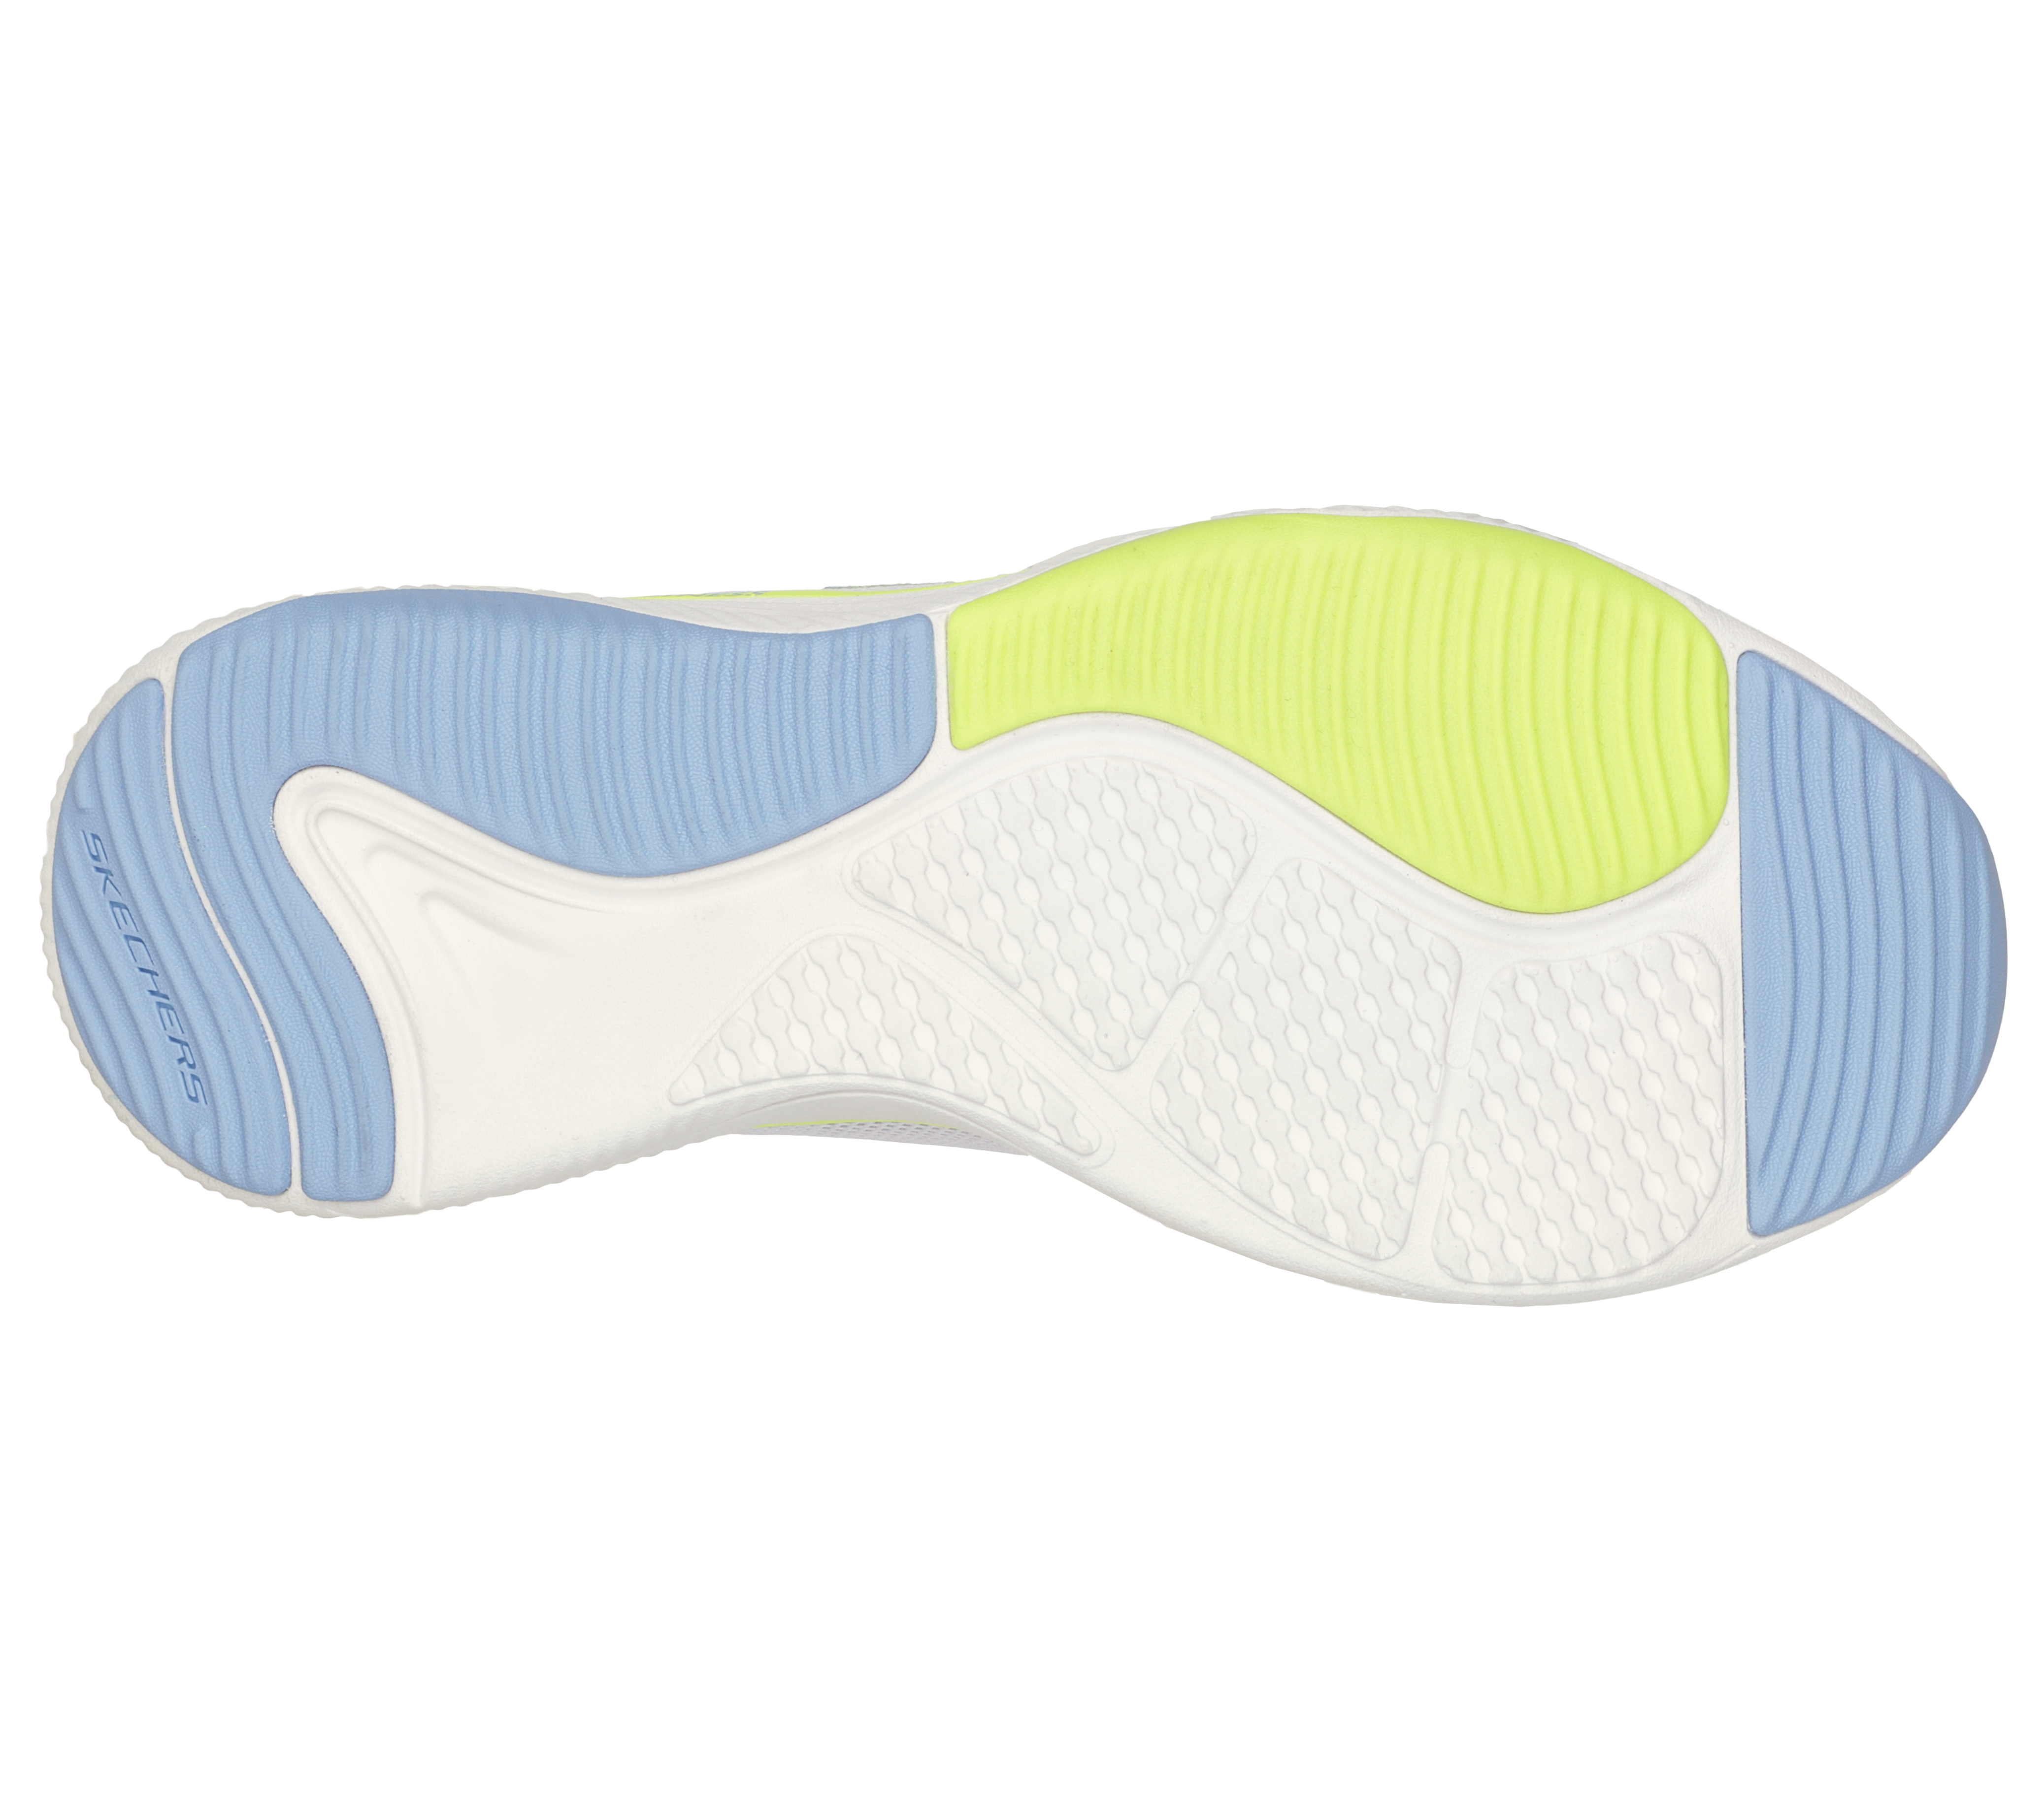 Perioperative period periscope Commemorative Relaxed Fit: D'Lux Fitness | SKECHERS